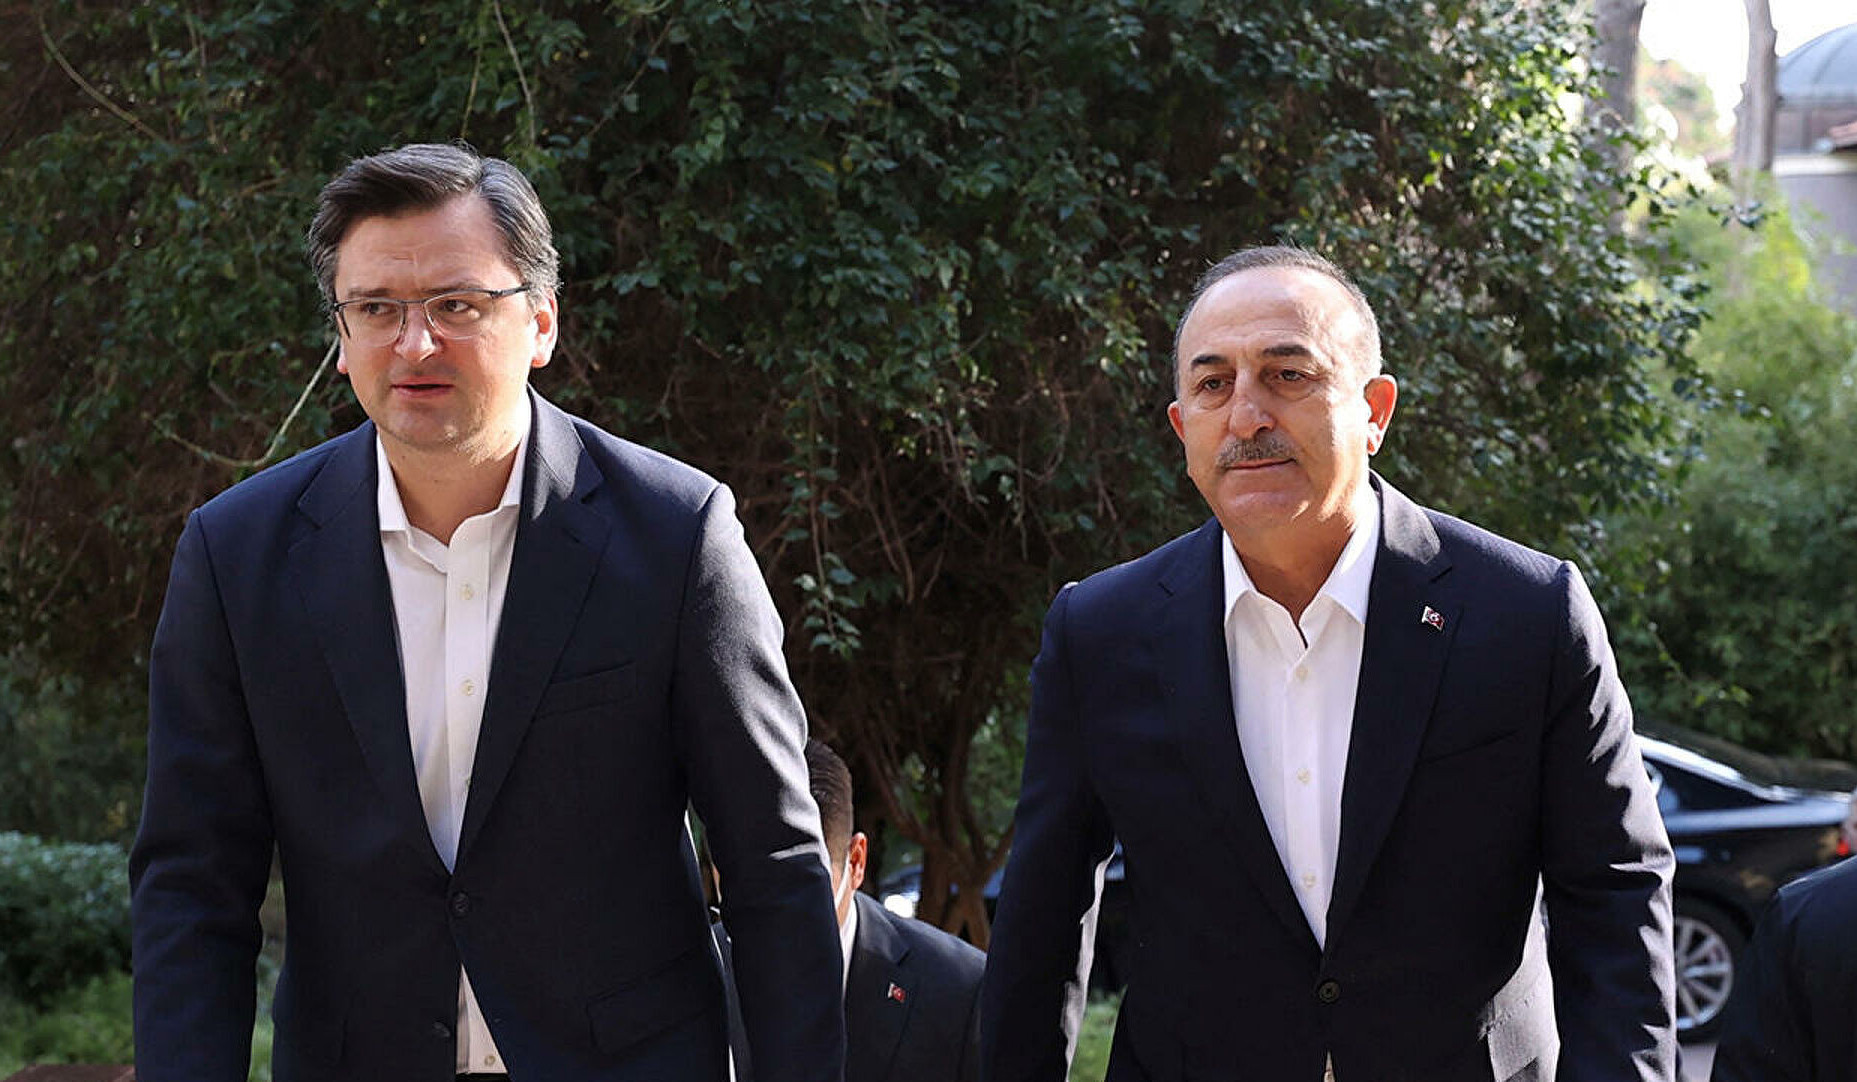 Çavuşoğlu and Kuleba coordinated efforts to respond to Russia's actions at UN